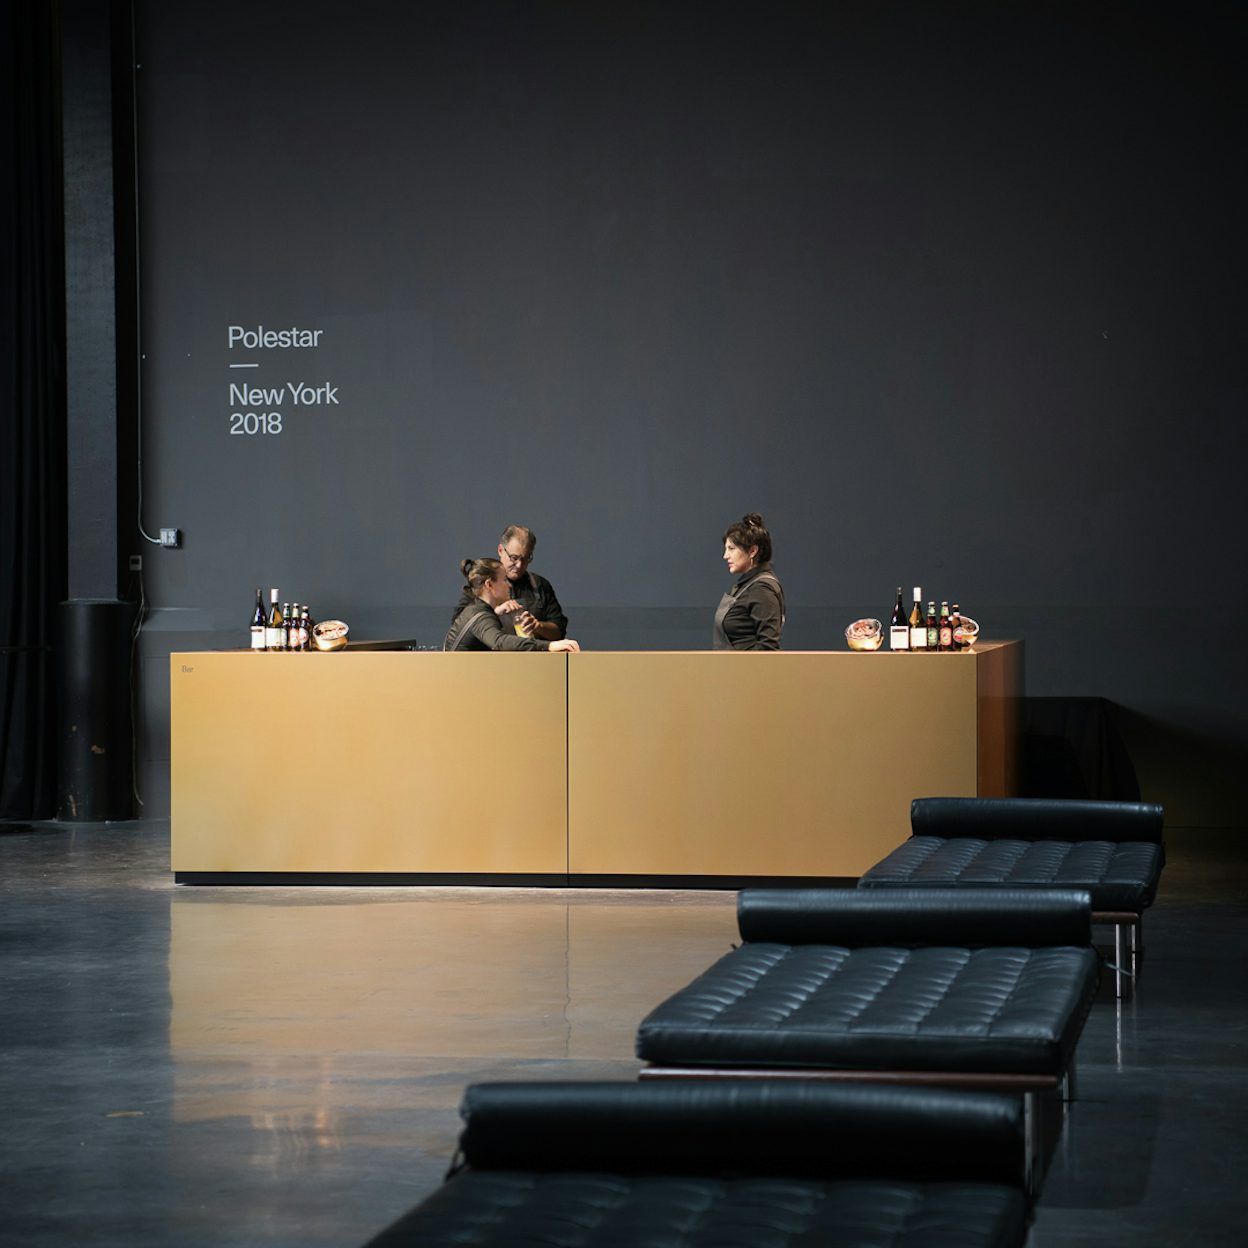 Three people behind a bar in front of a black wall with the text Polestar New York 2018.